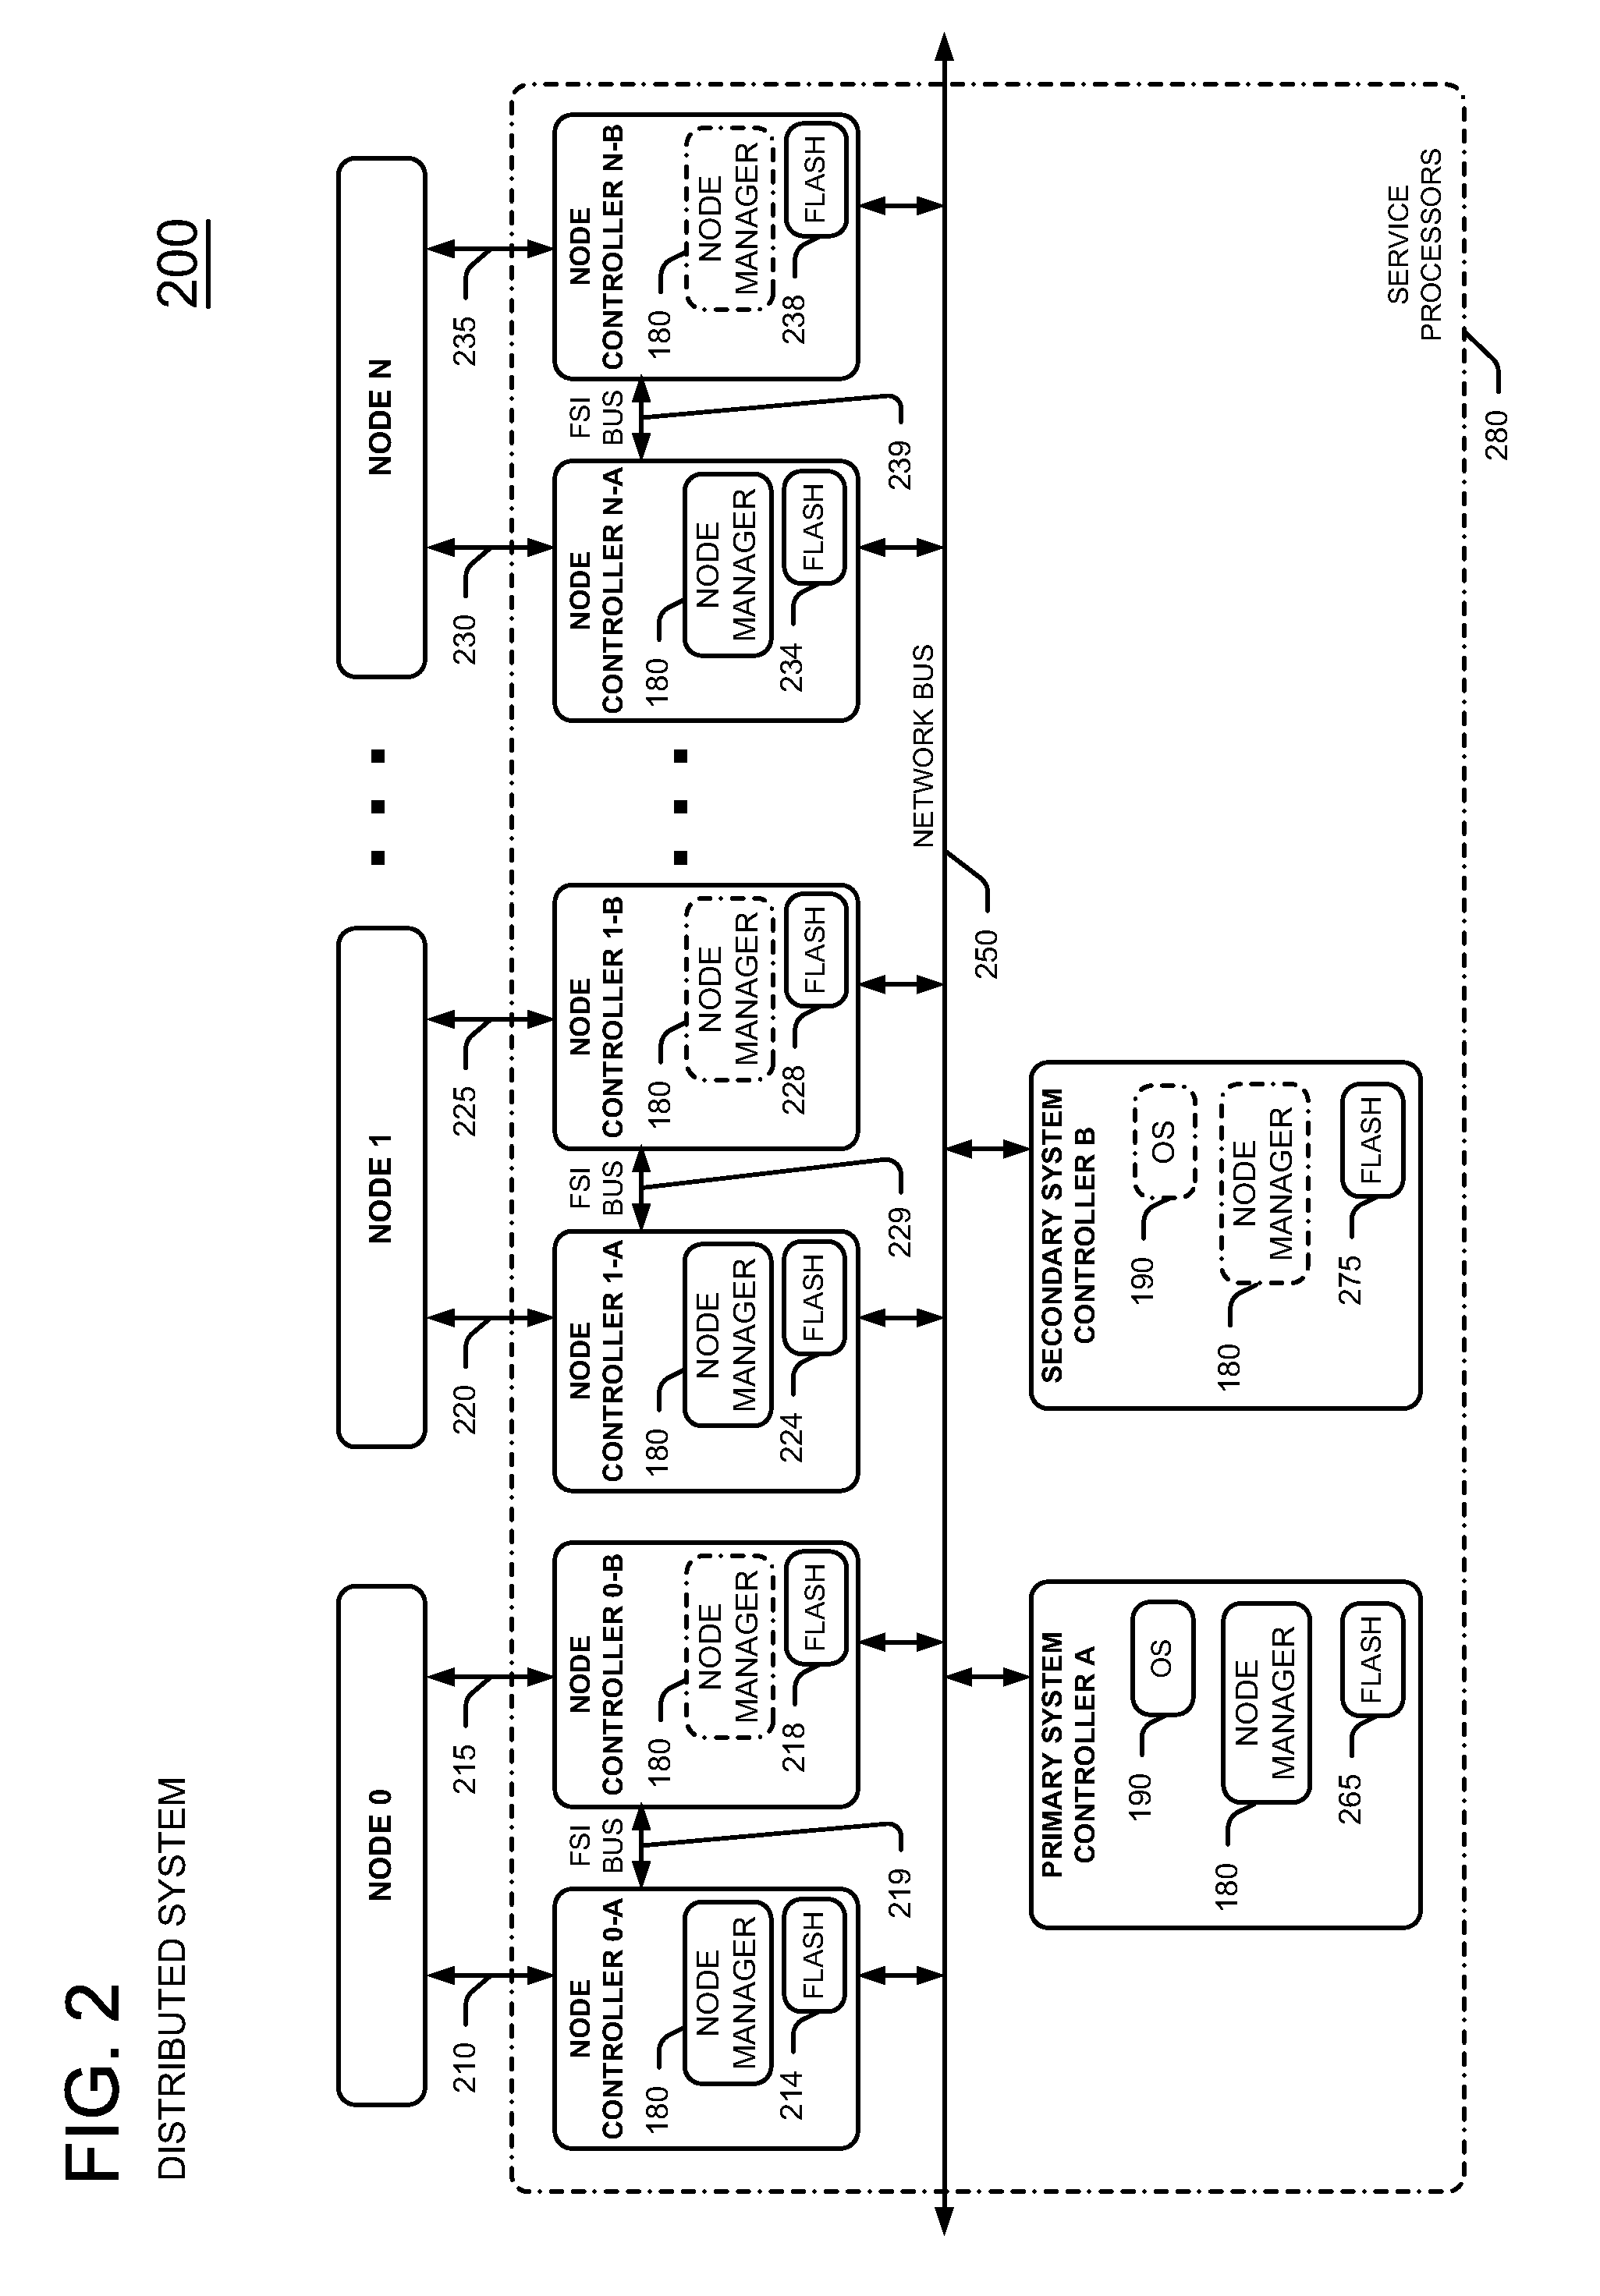 Node controller first failure error management for a distributed system